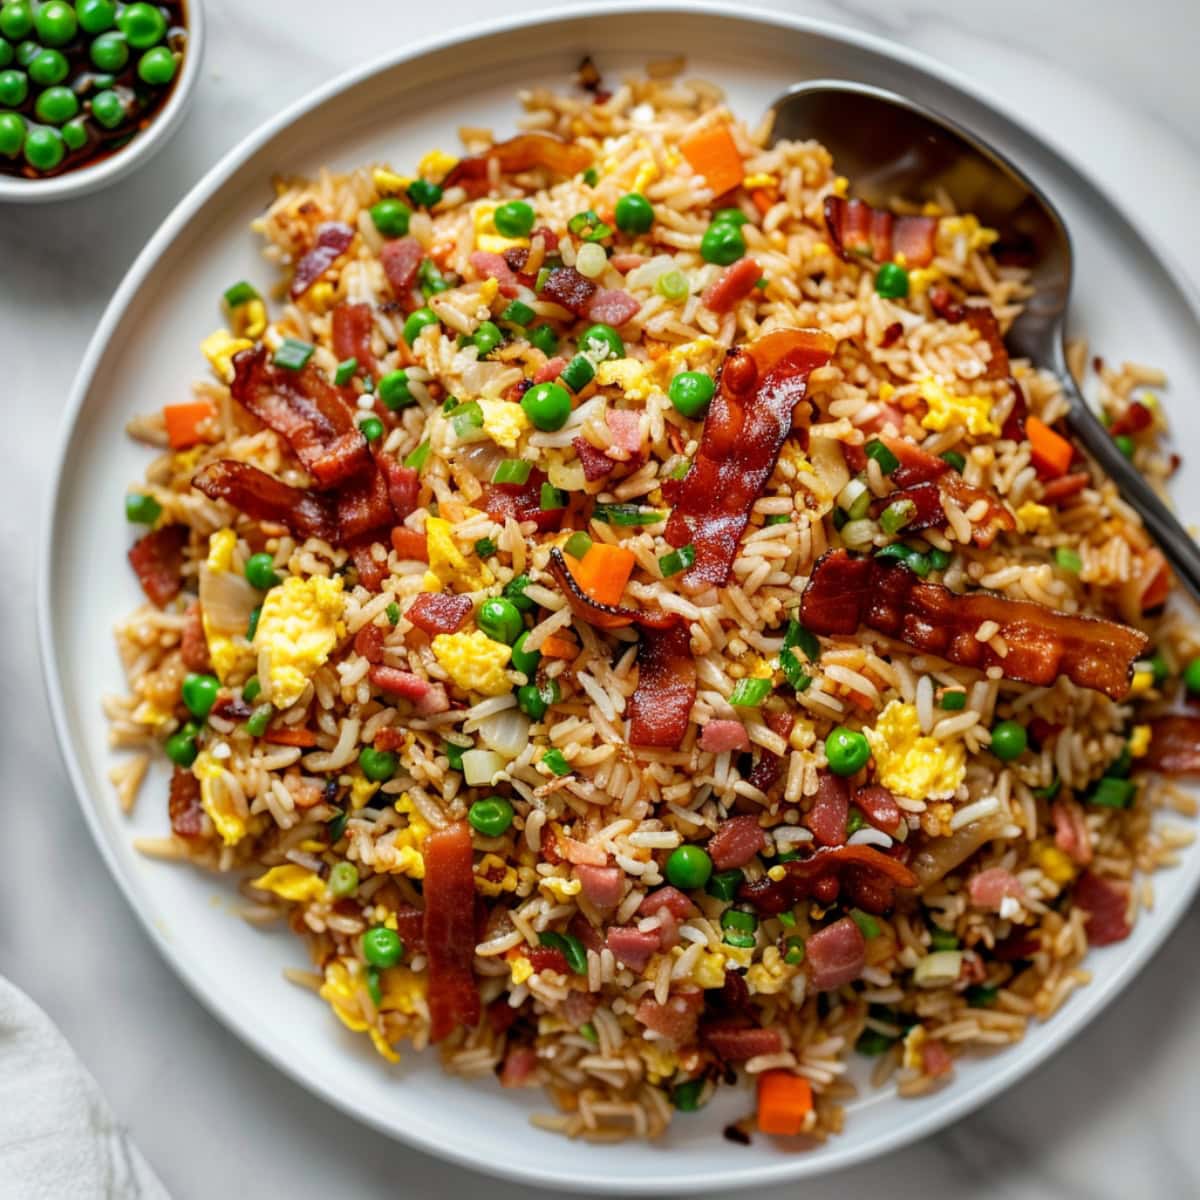 Bacon fried rice served in a white round plate.